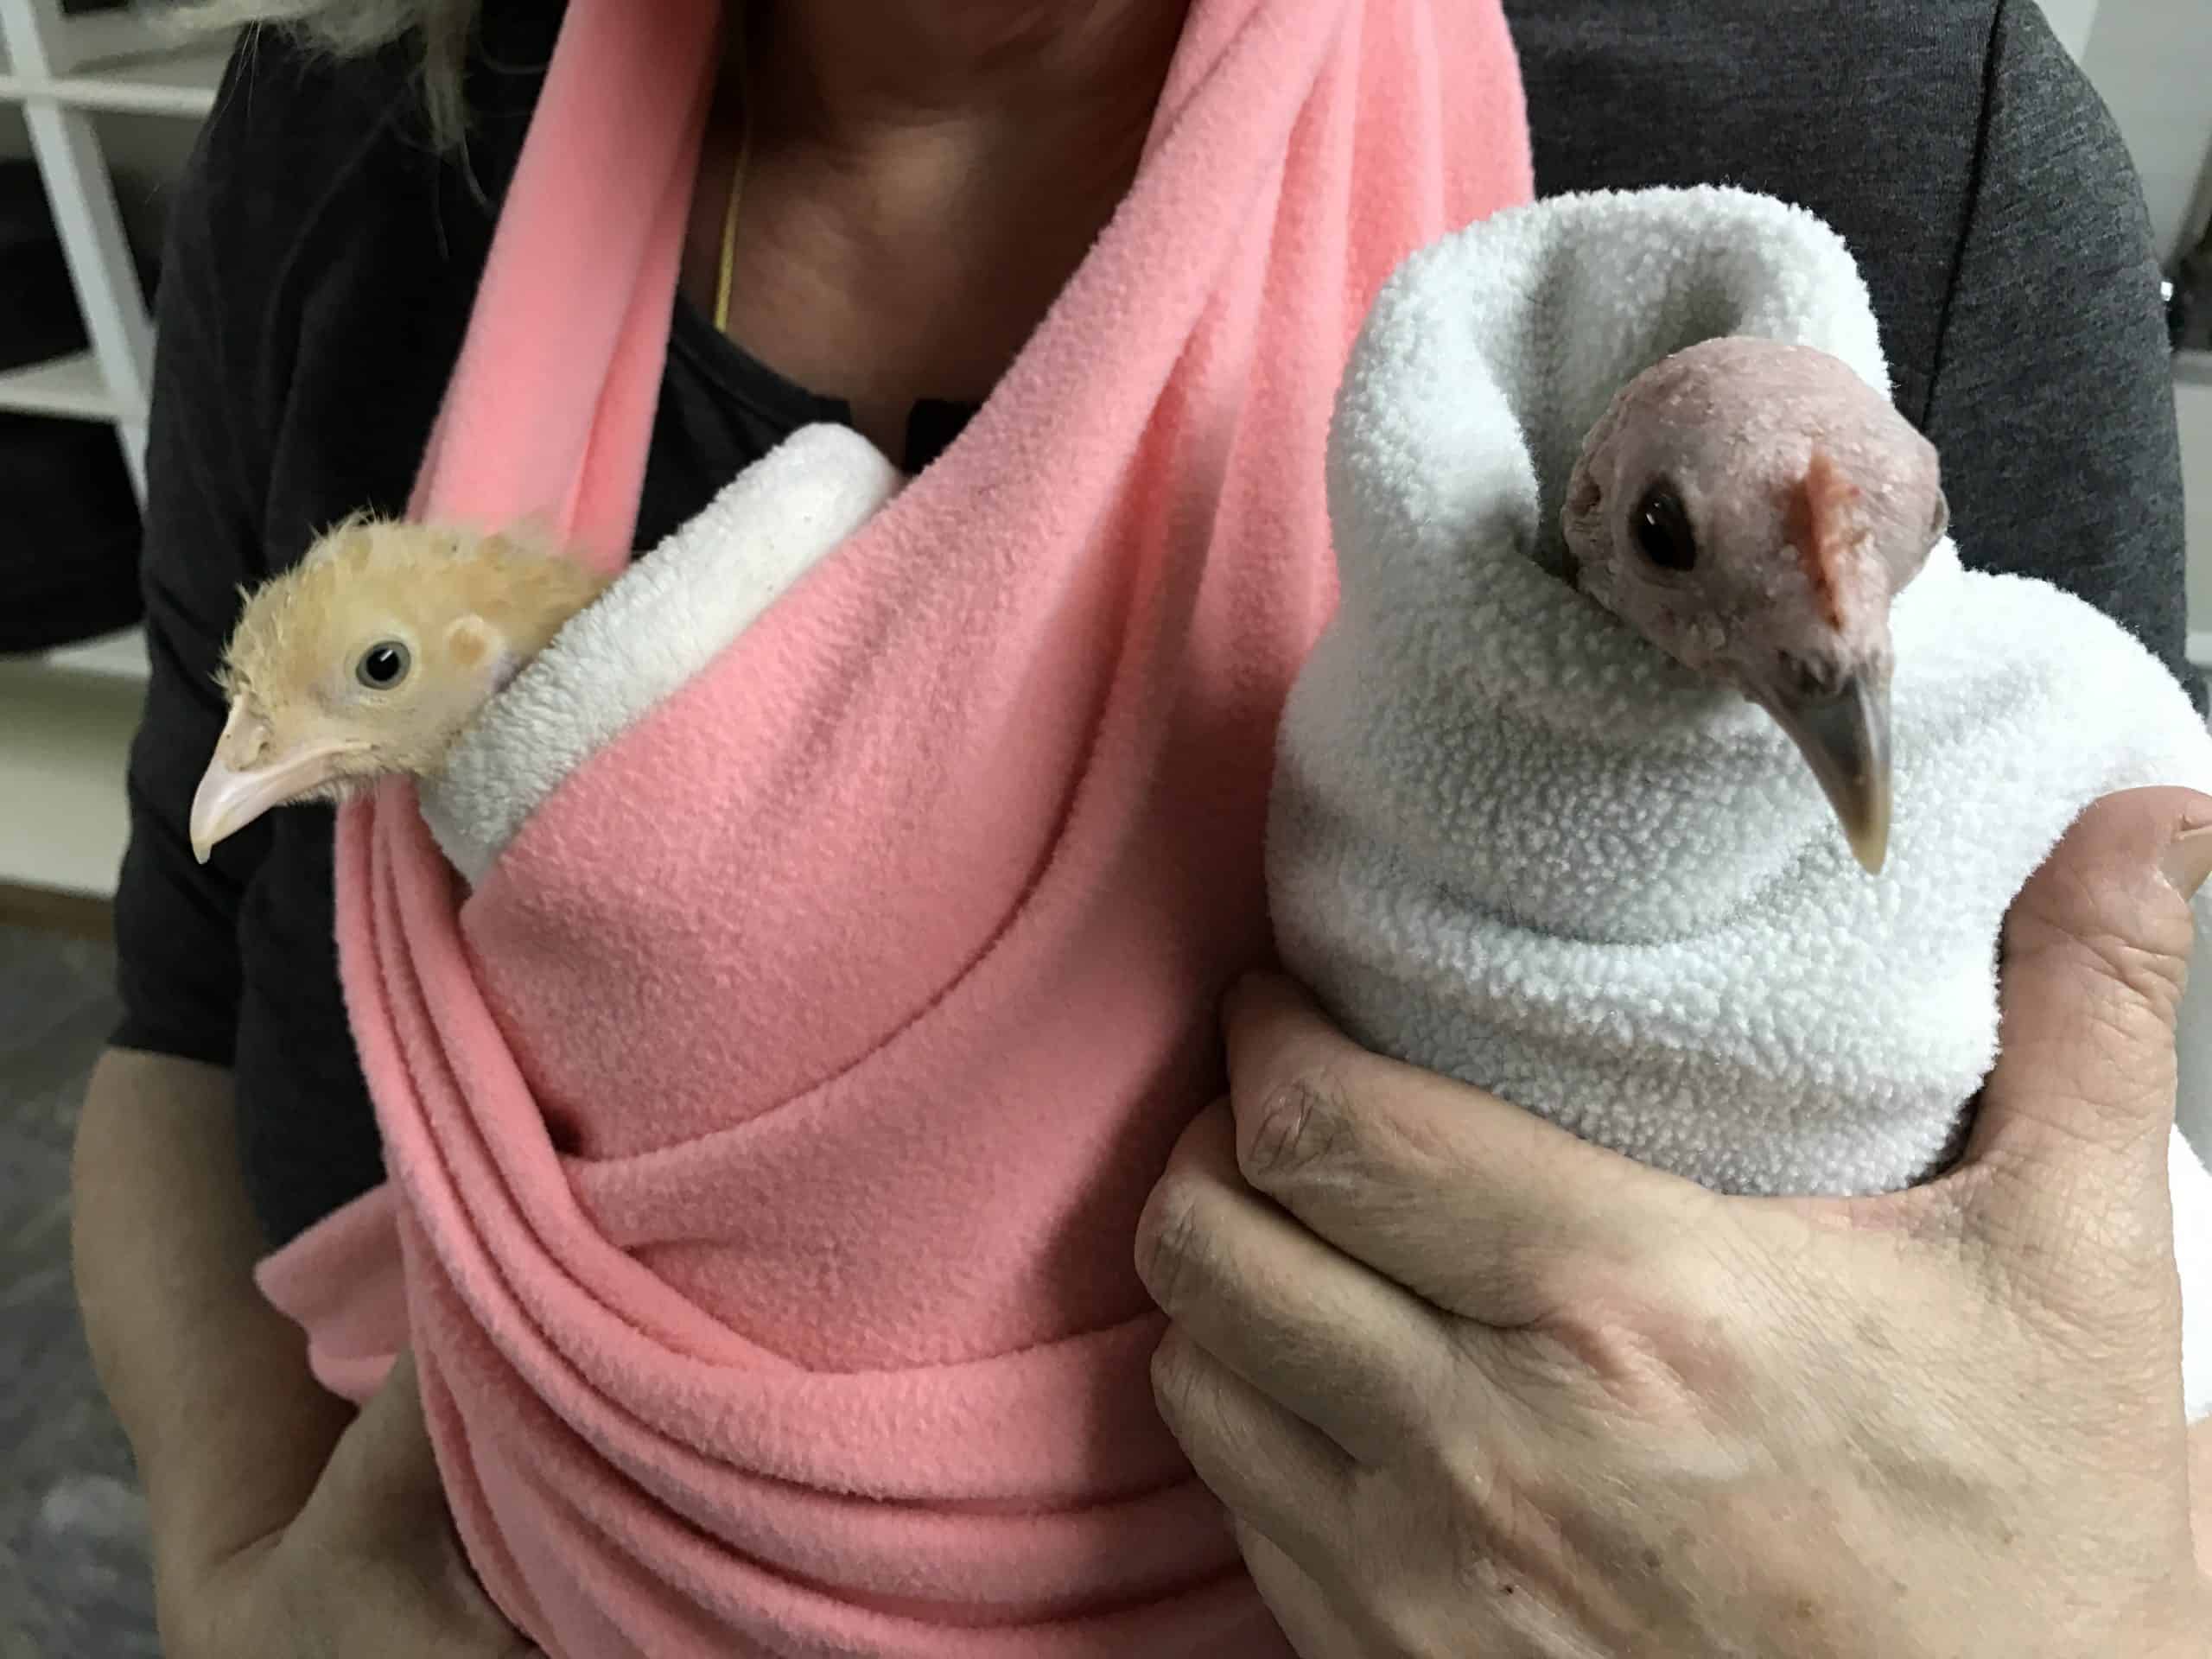 A pink fleece blanket creates a sling that hangs around a caregiver's neck and holds a small buff chicken. A small chicken with a featherless head is wrapped in a blanket and held in the caregiver's hand.